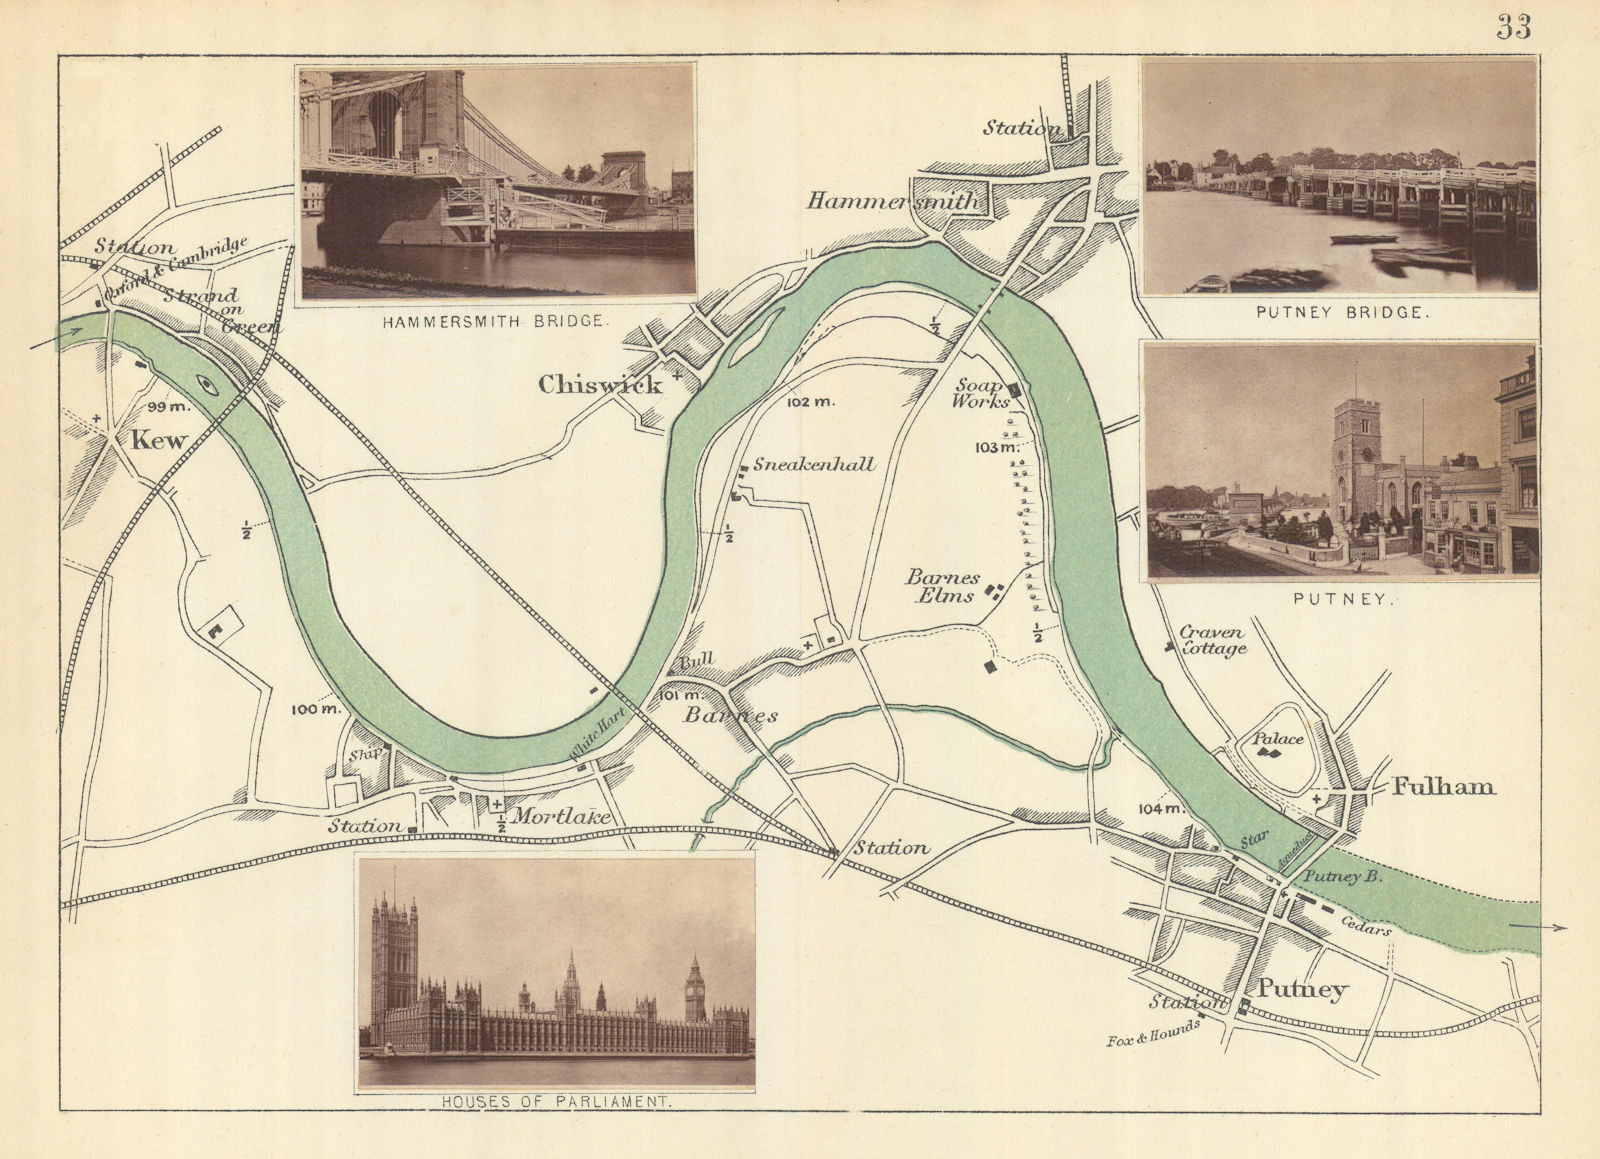 RIVER THAMES Kew Barnes Chiswick Hammersmith Fulham Putney. TAUNT 1879 old map